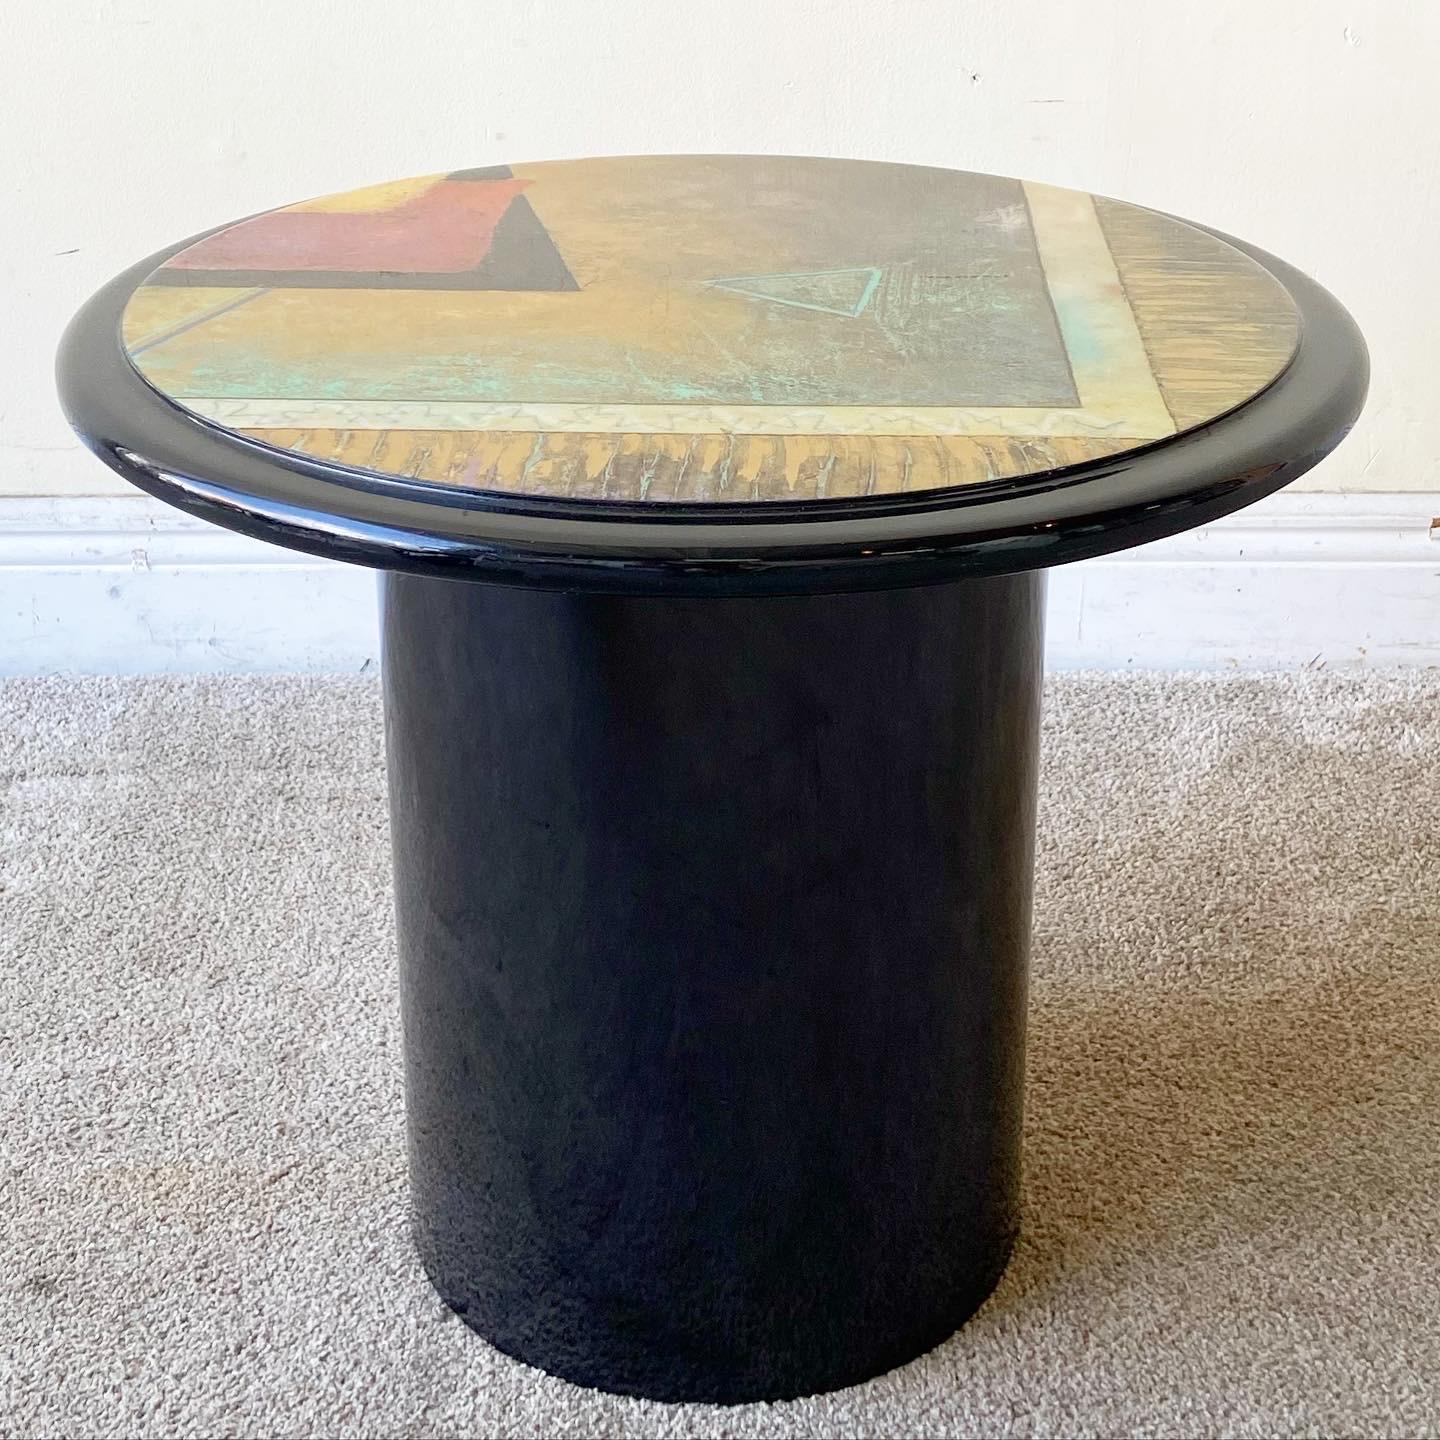 Late 20th Century Postmodern Circular Black Lacquered and Painted Mushroom Side Tables - a Pair For Sale